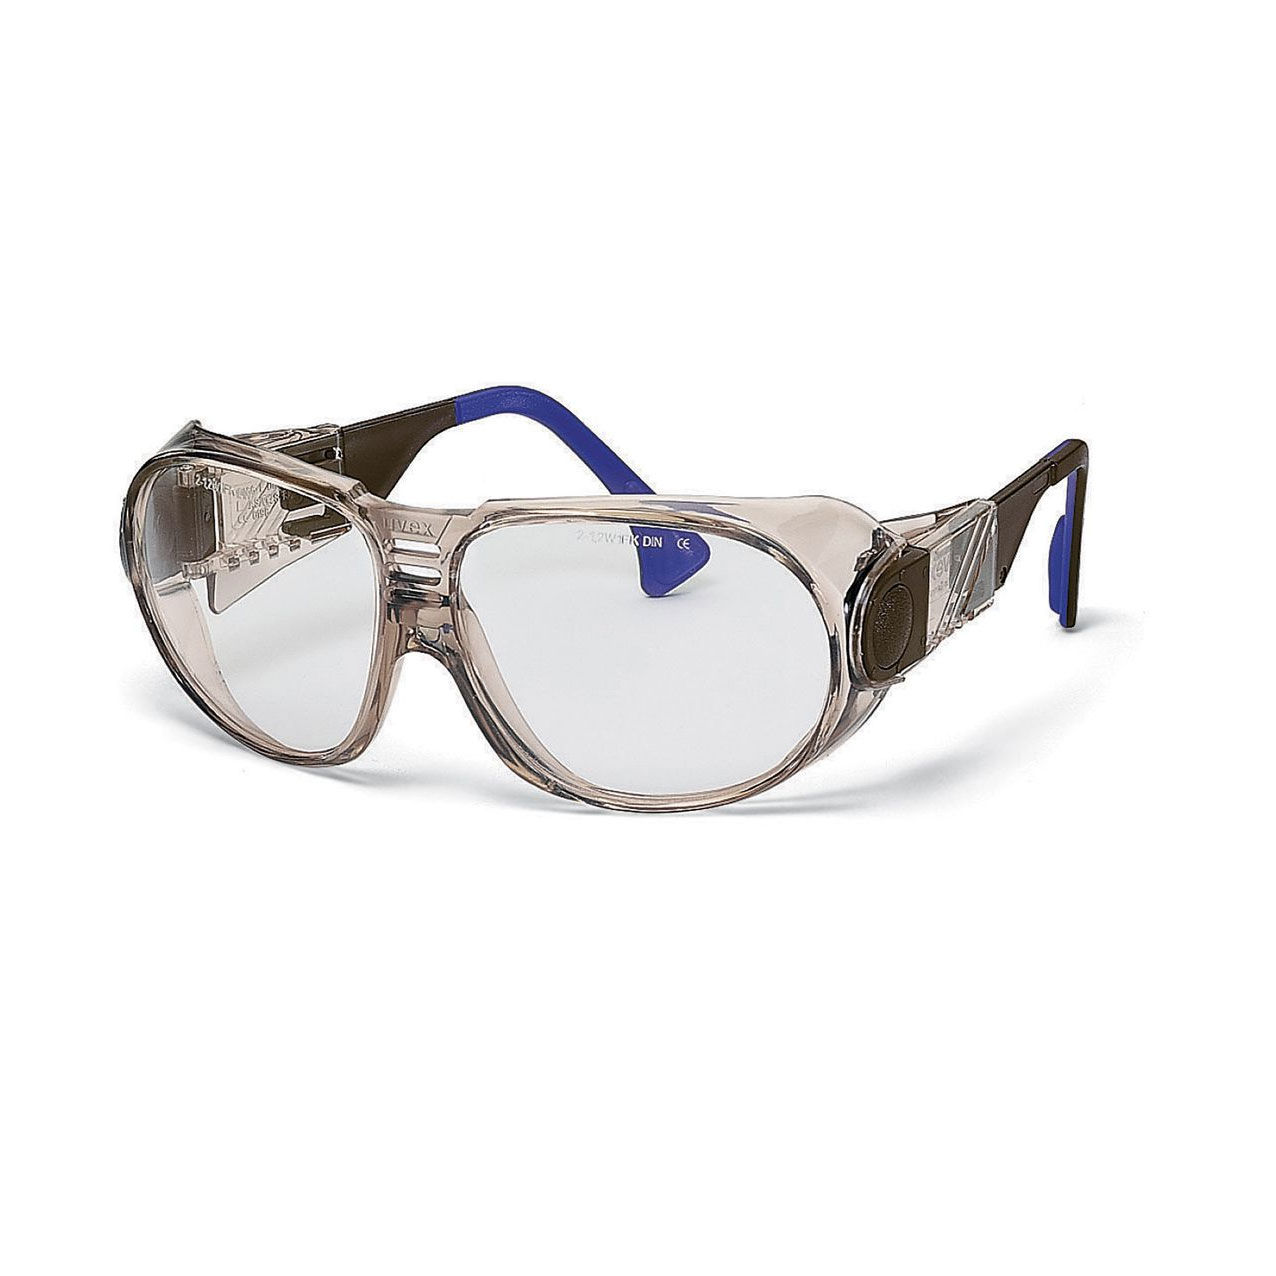 uvex futura safety spectacles - Taupe